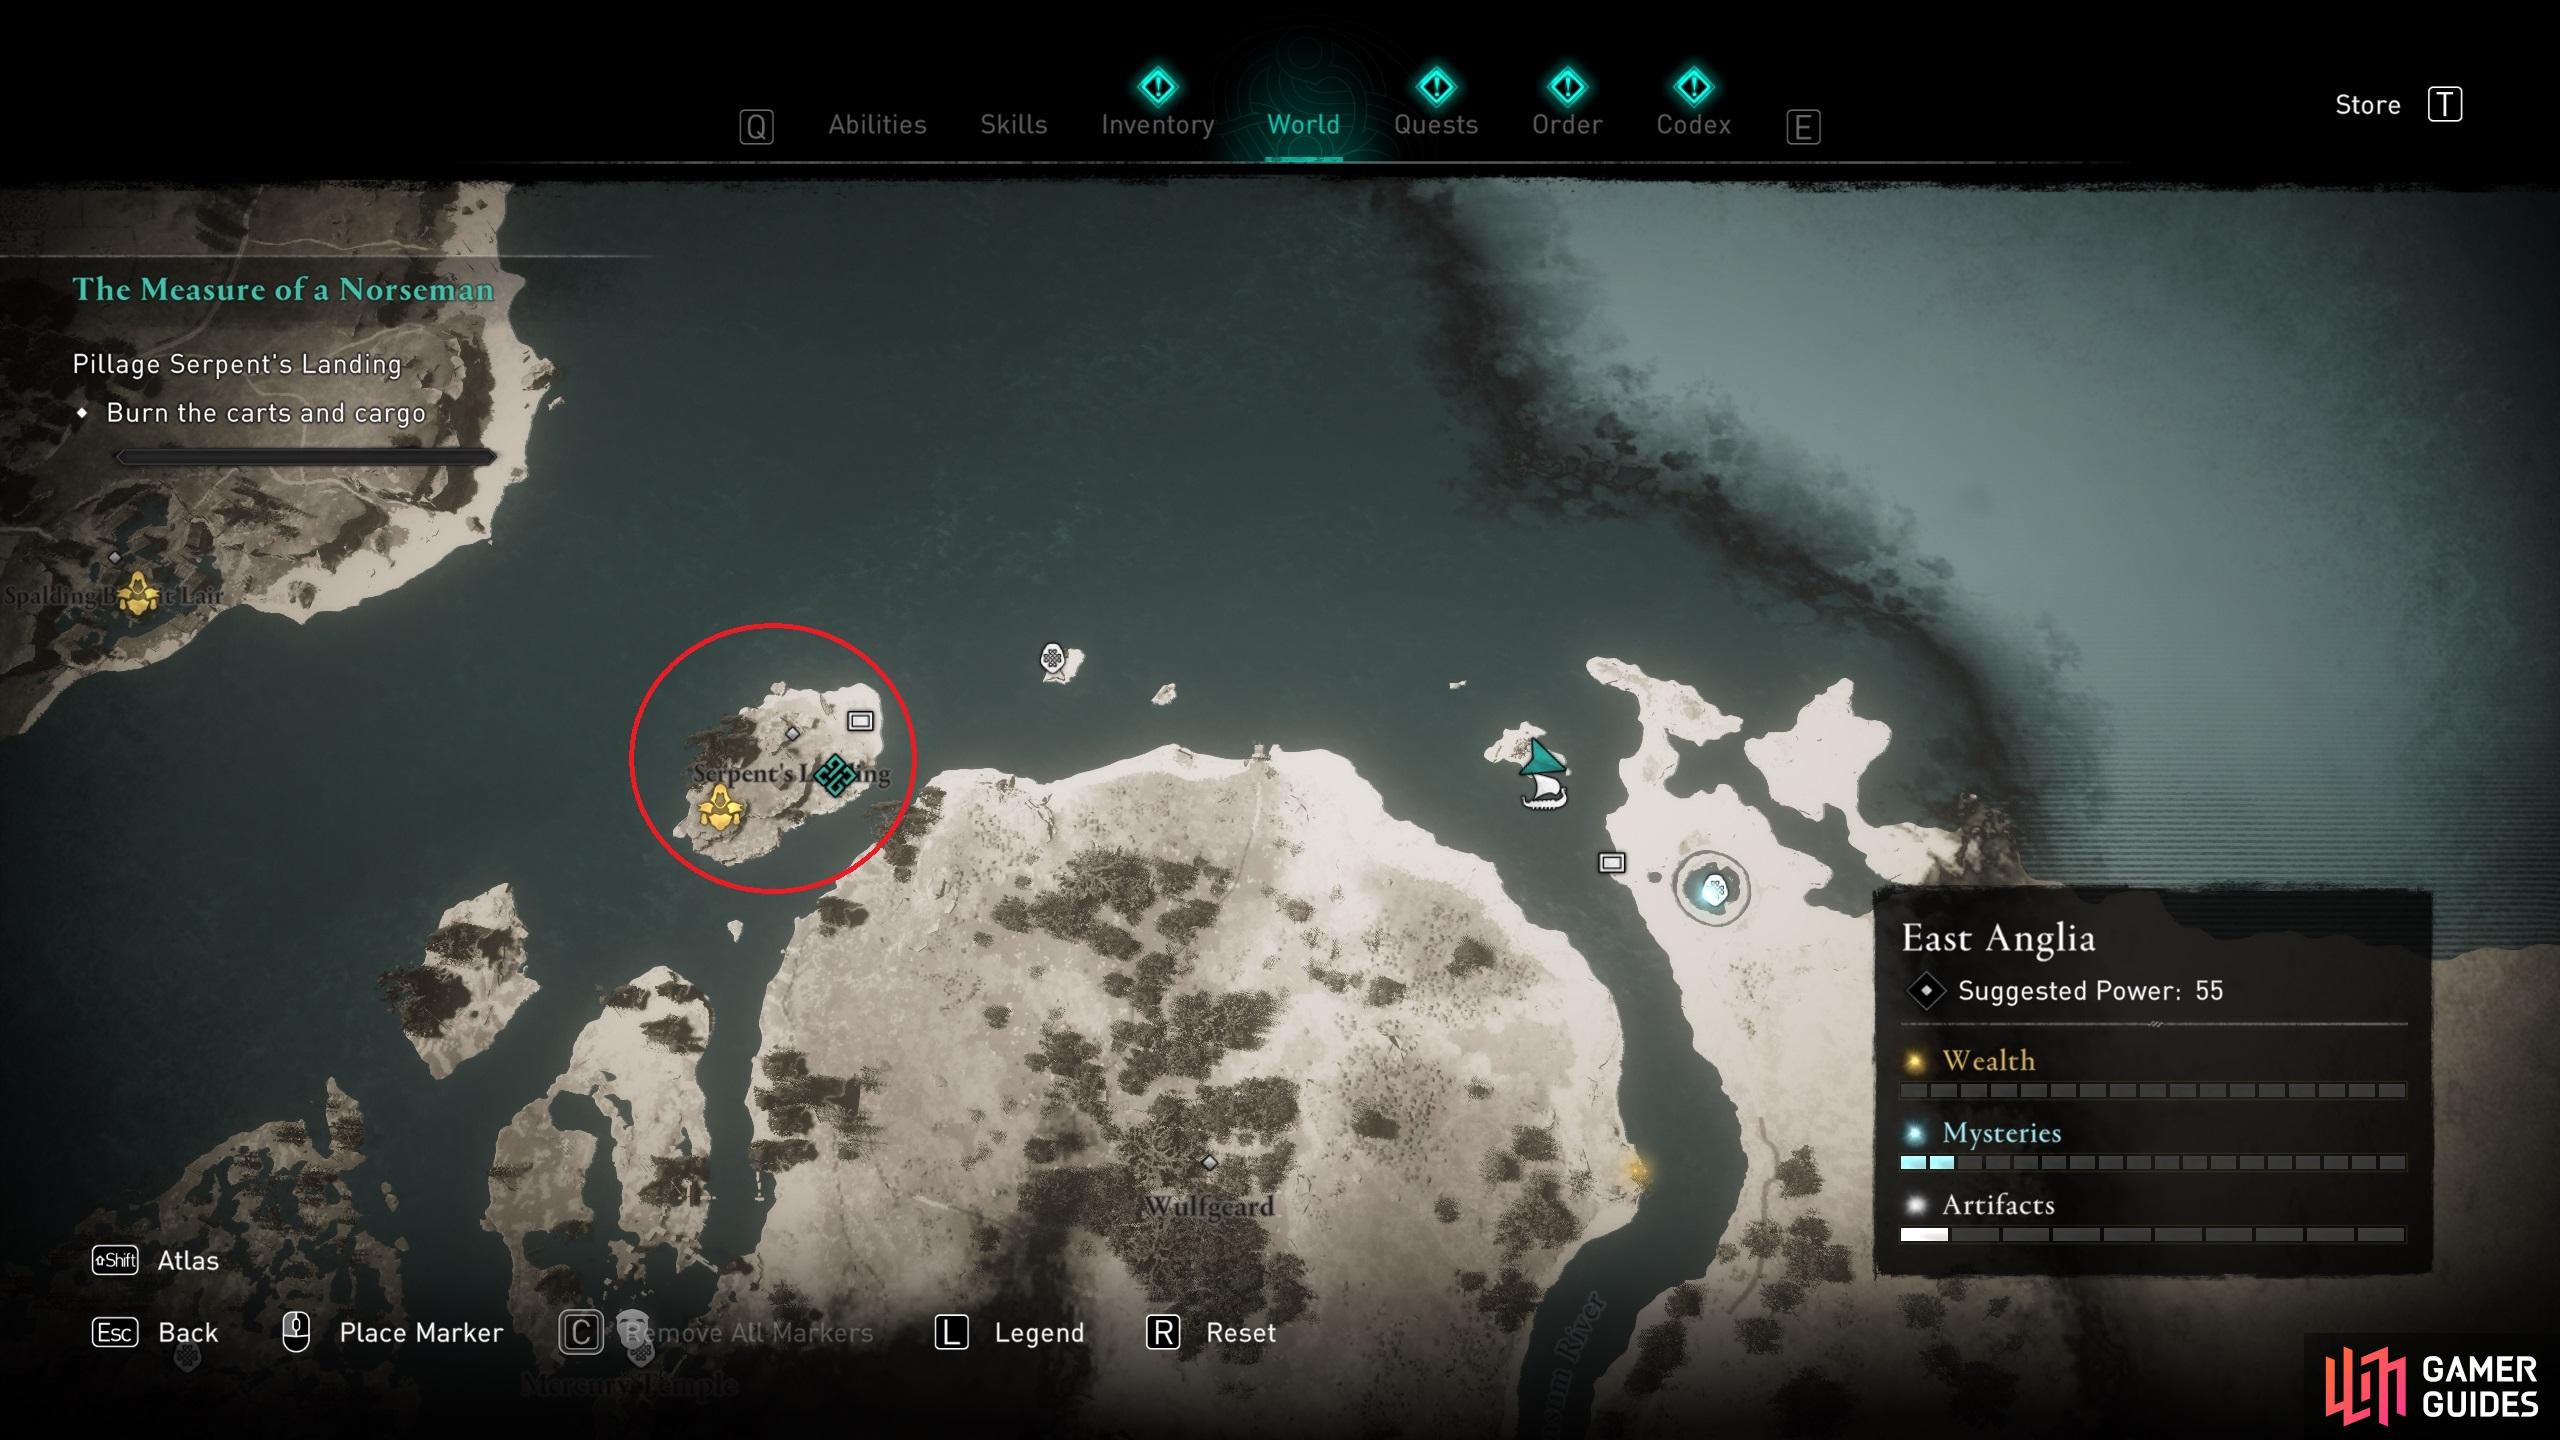 The location of the camp on the island named Serpent's Landing.